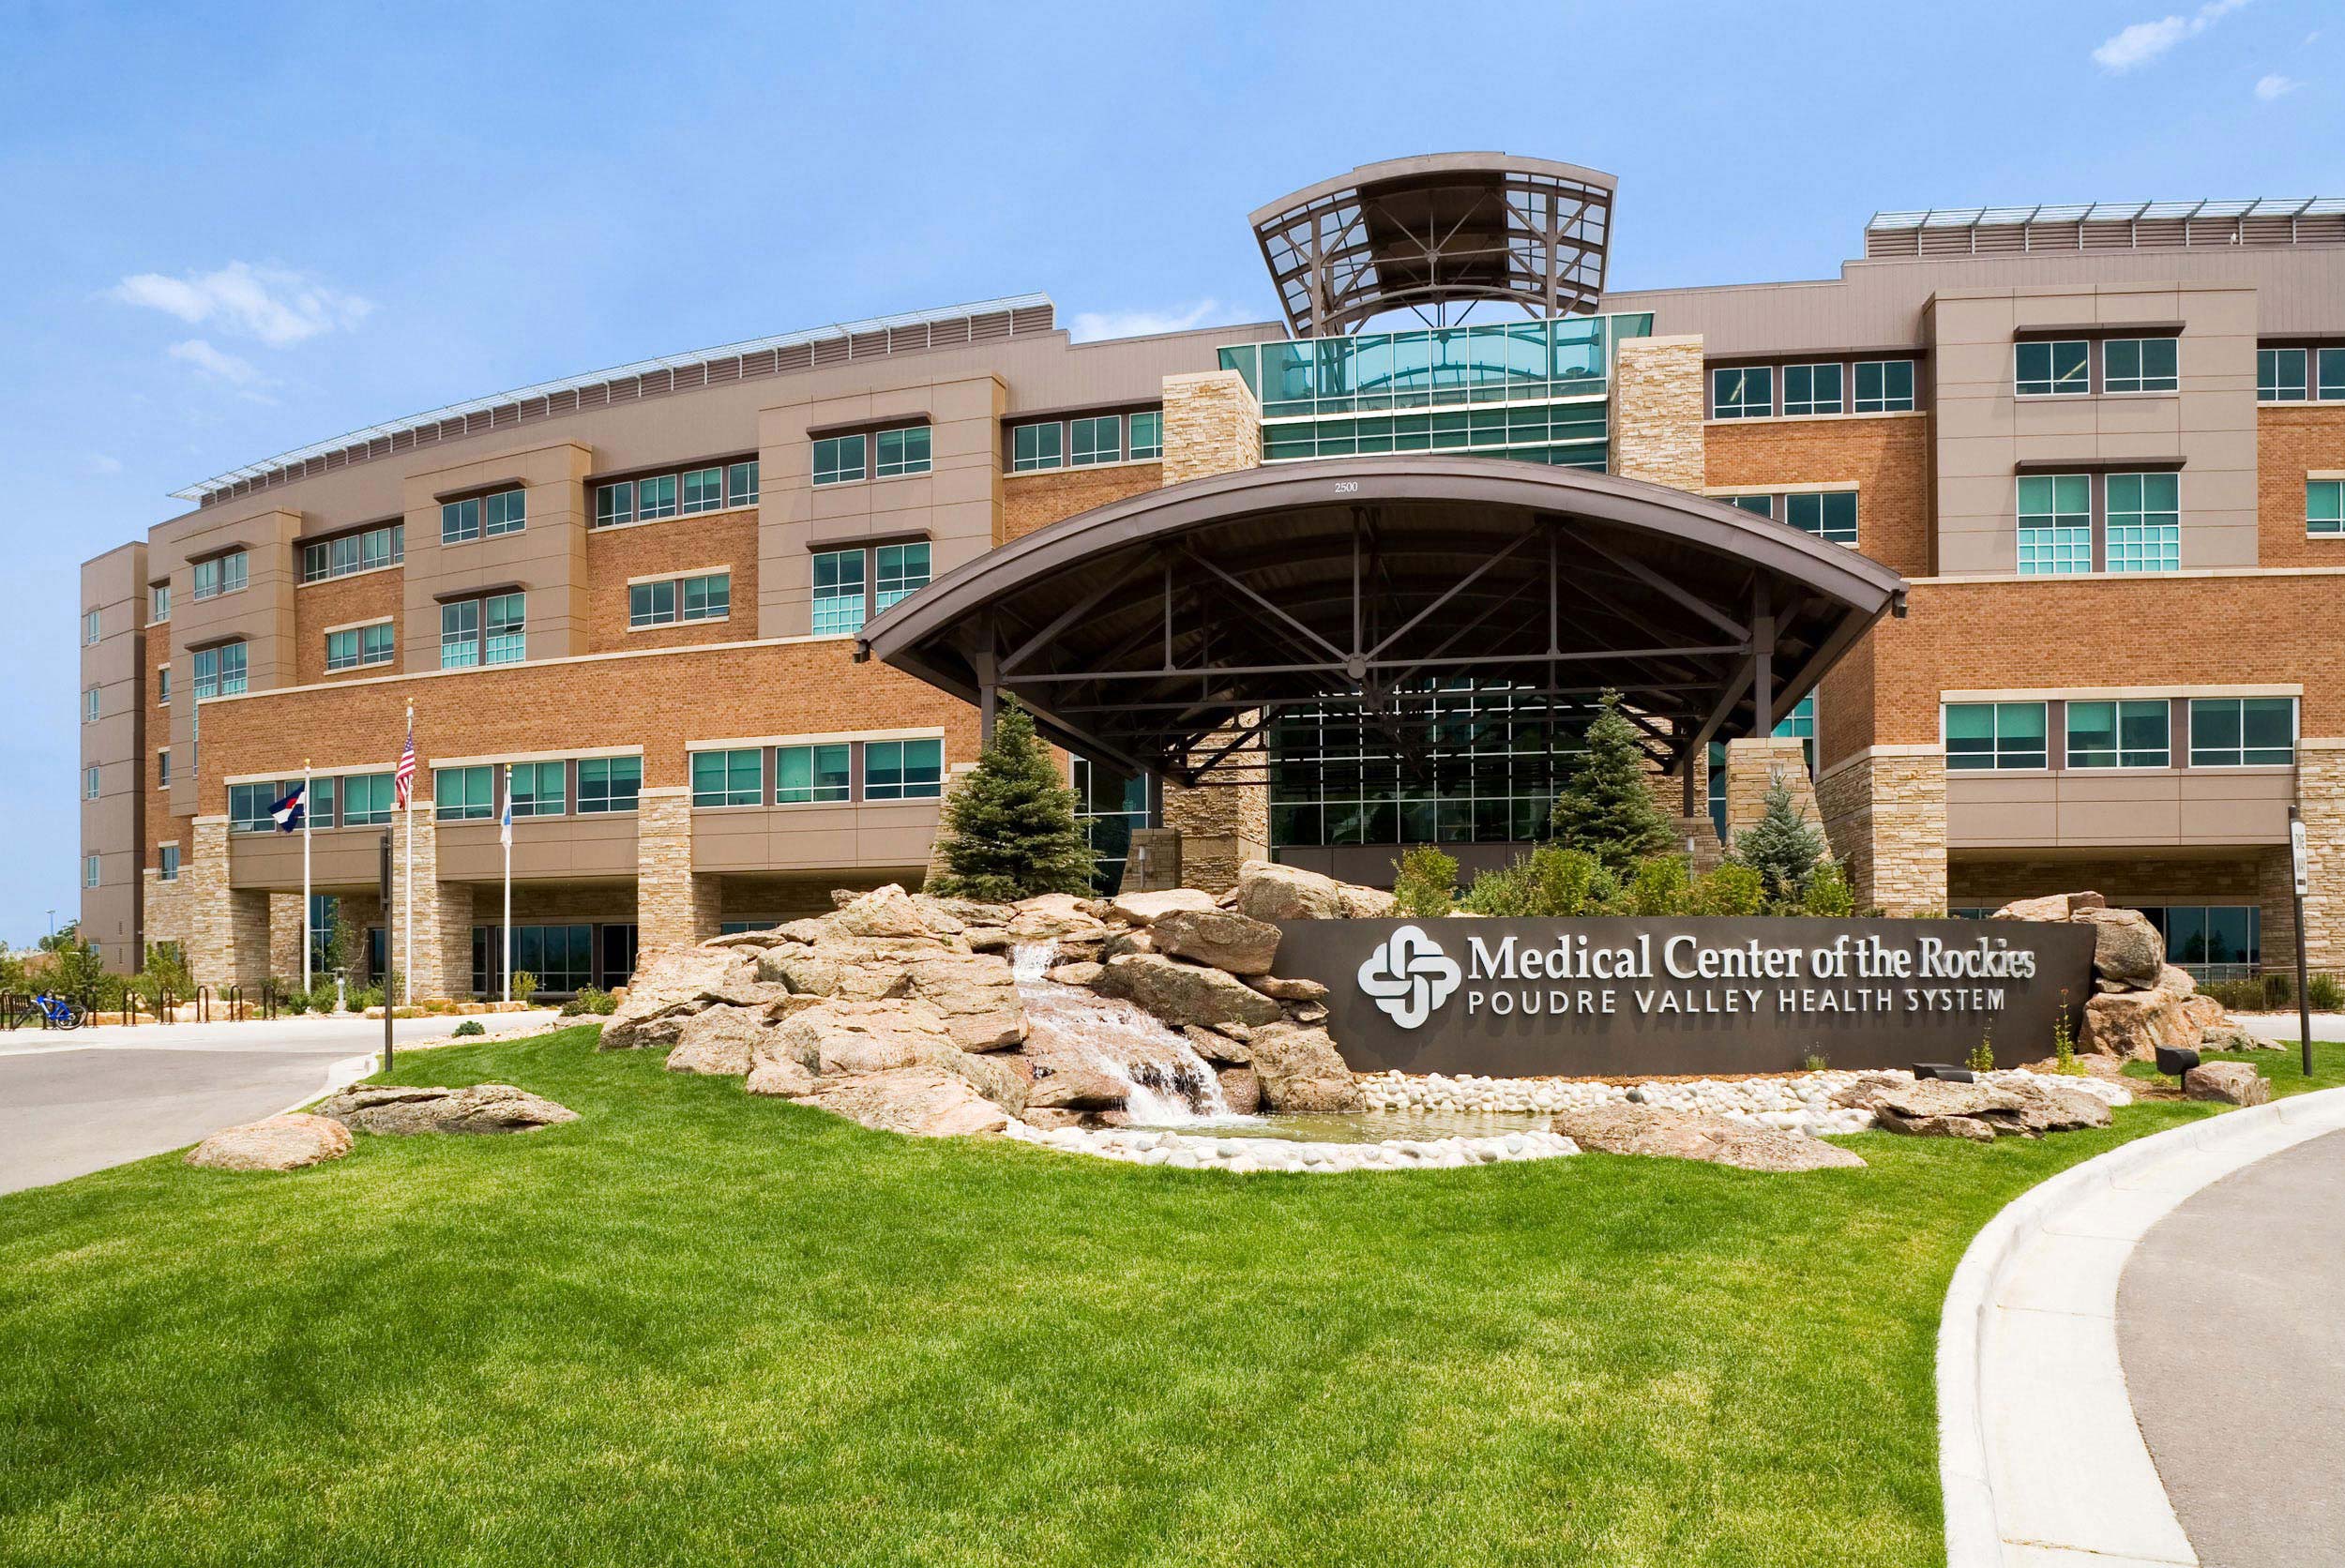 Main entrance to the Medical Center of the Rockies